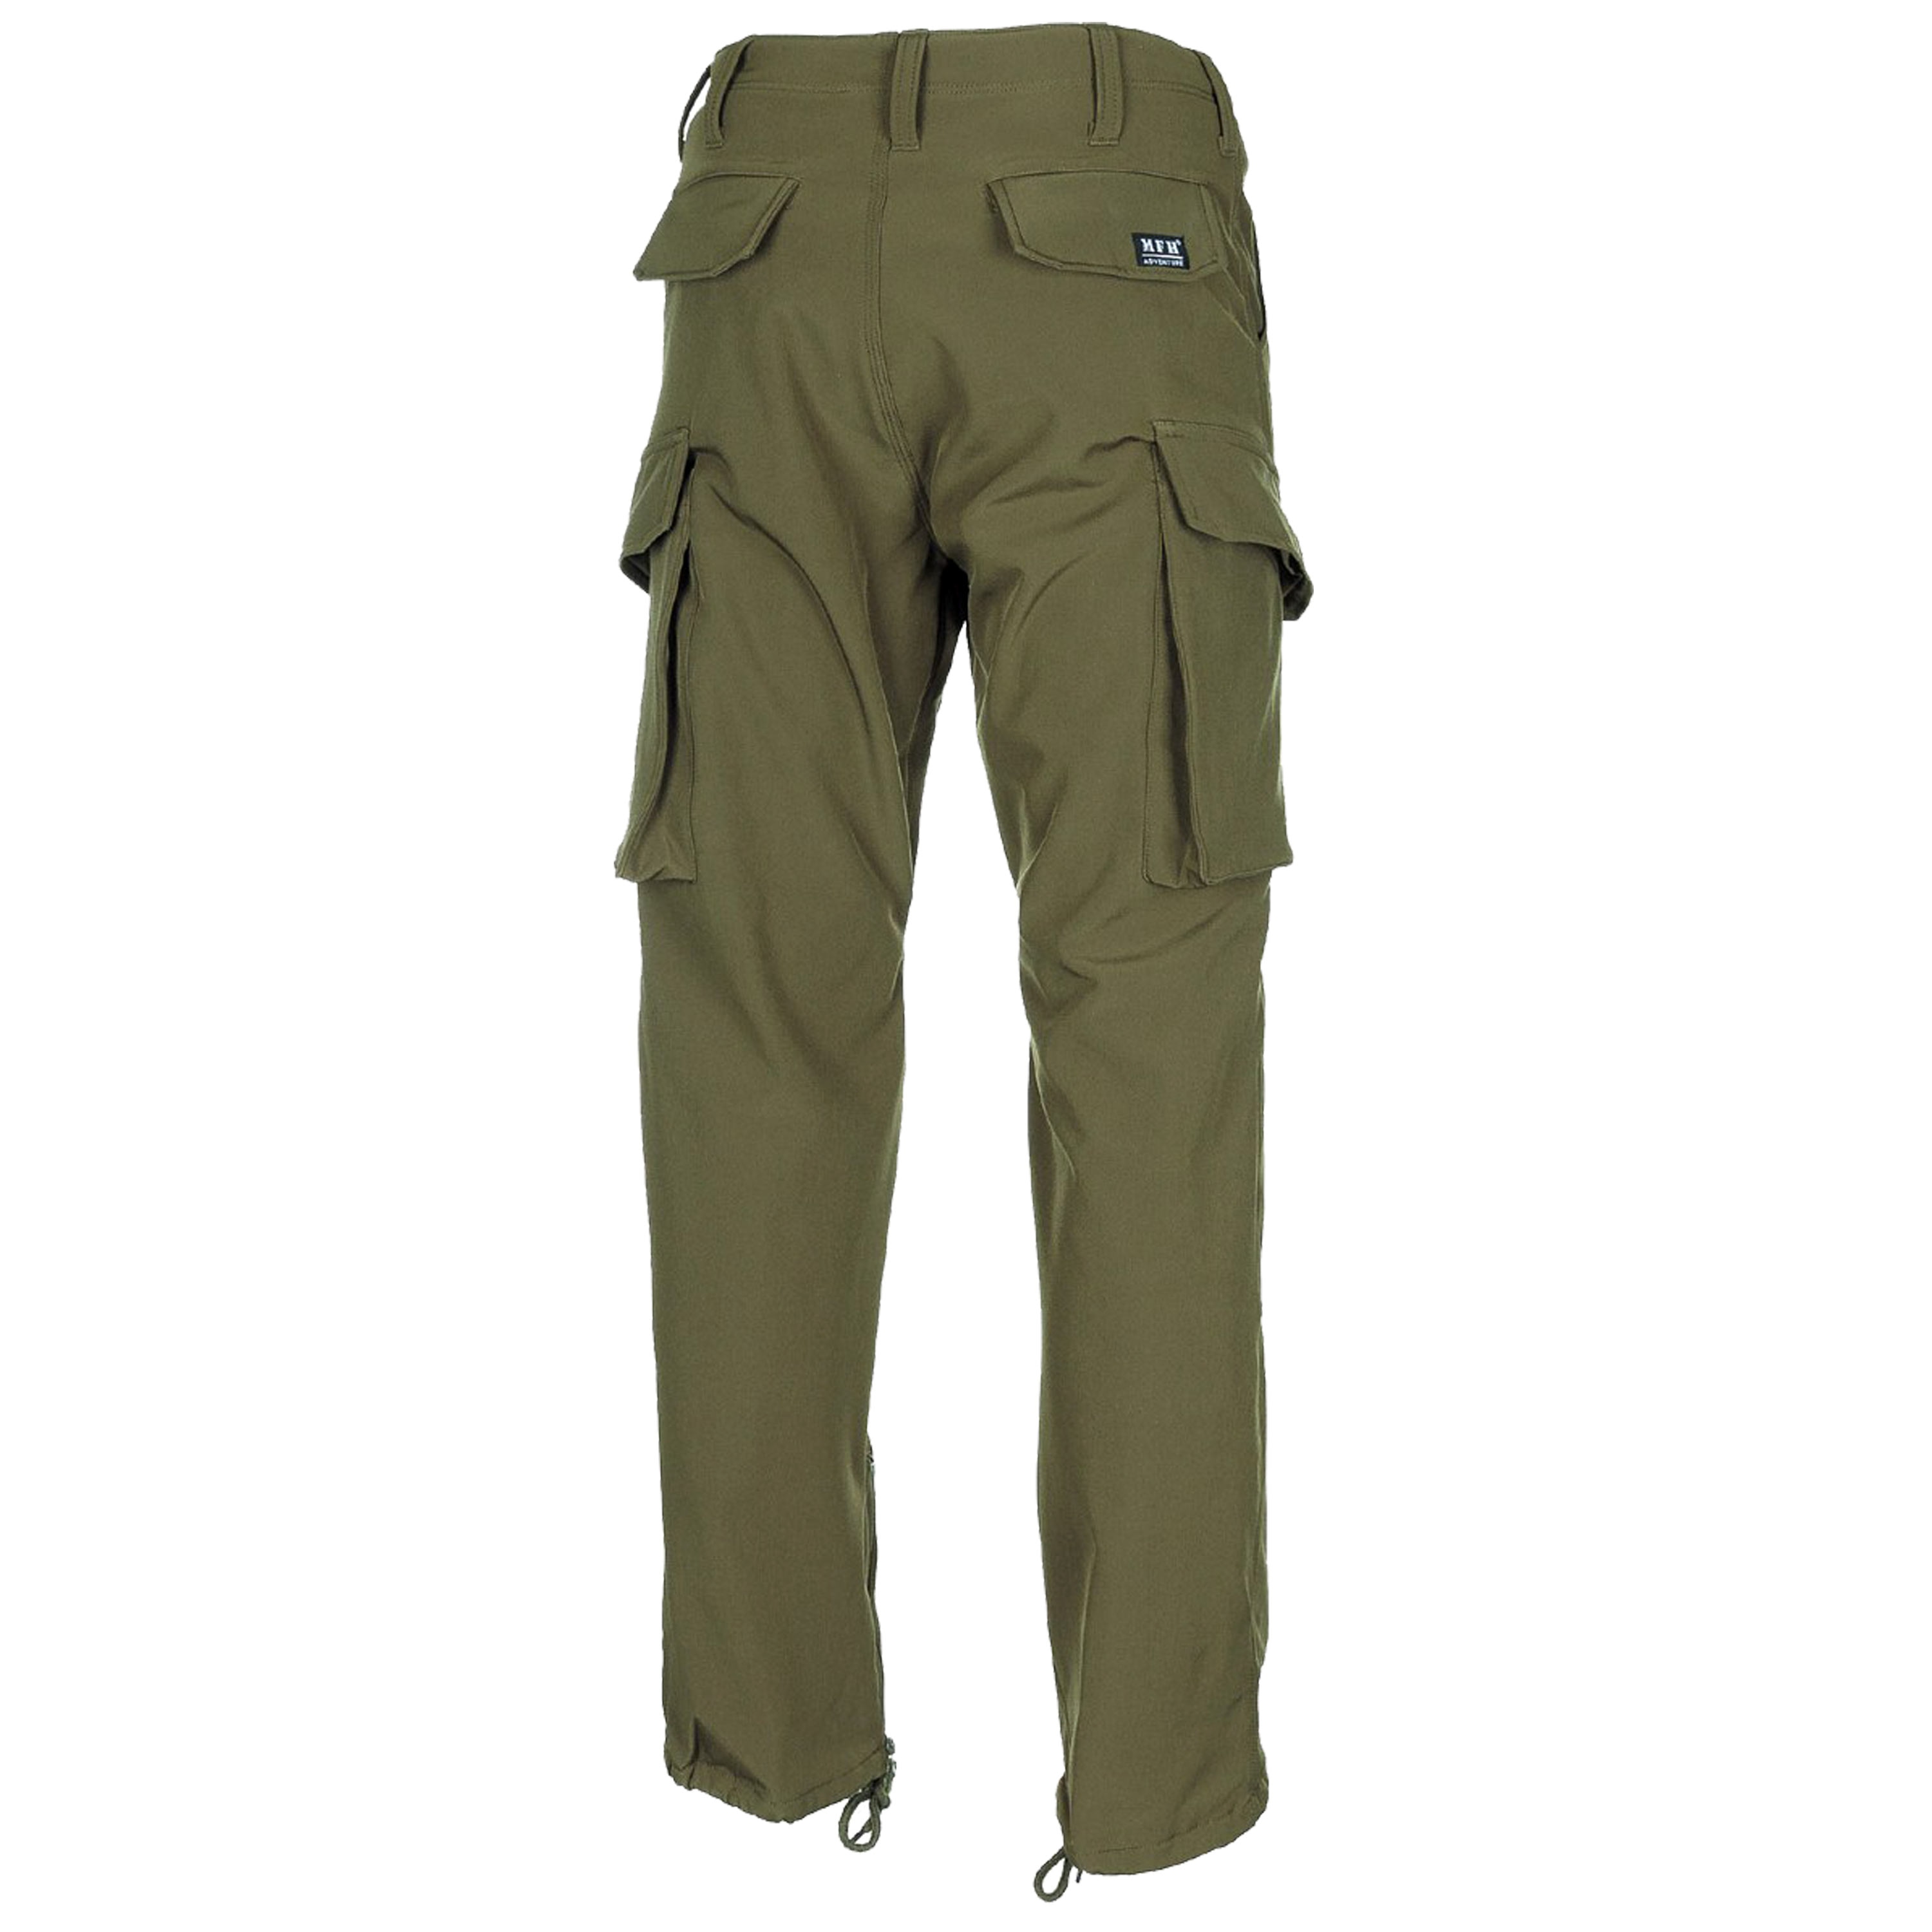 Mil-Tec Explorer Soft Shell Pants Expedition Mens Lightweight Trousers Olive 